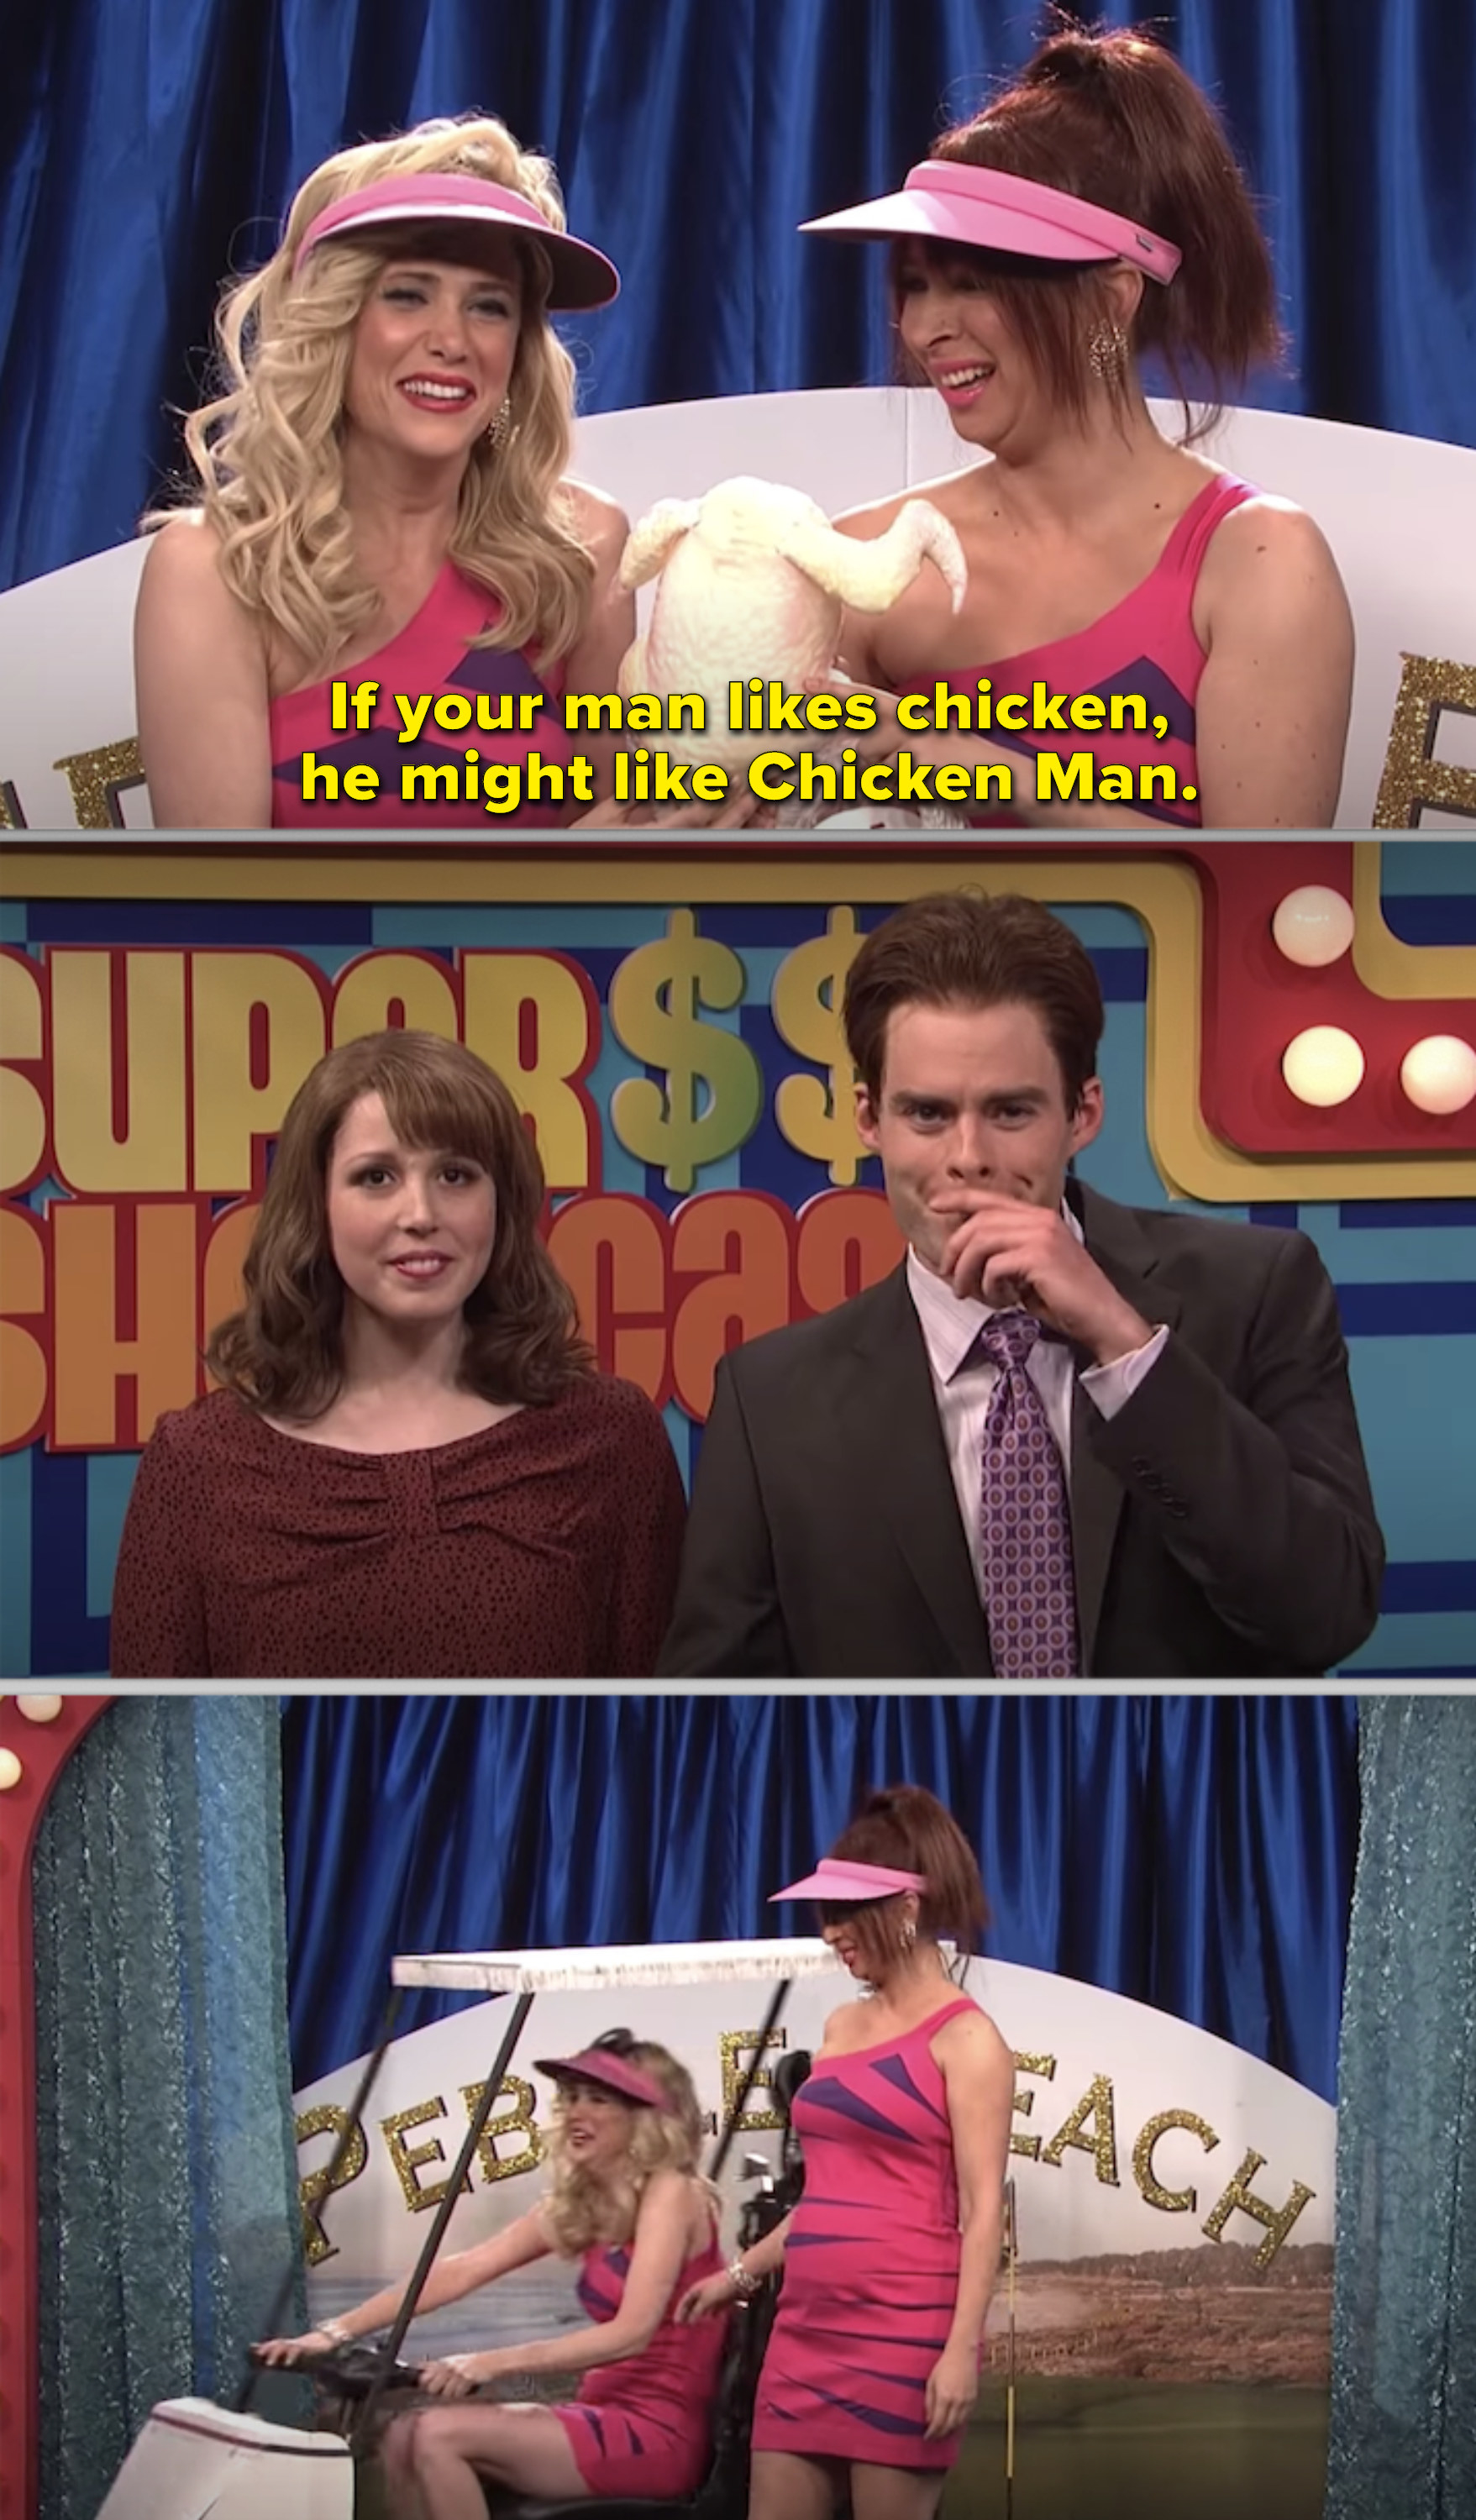 Three people on a game show set, two women in chicken-themed attire, one man in a suit, comedy sketch scenario